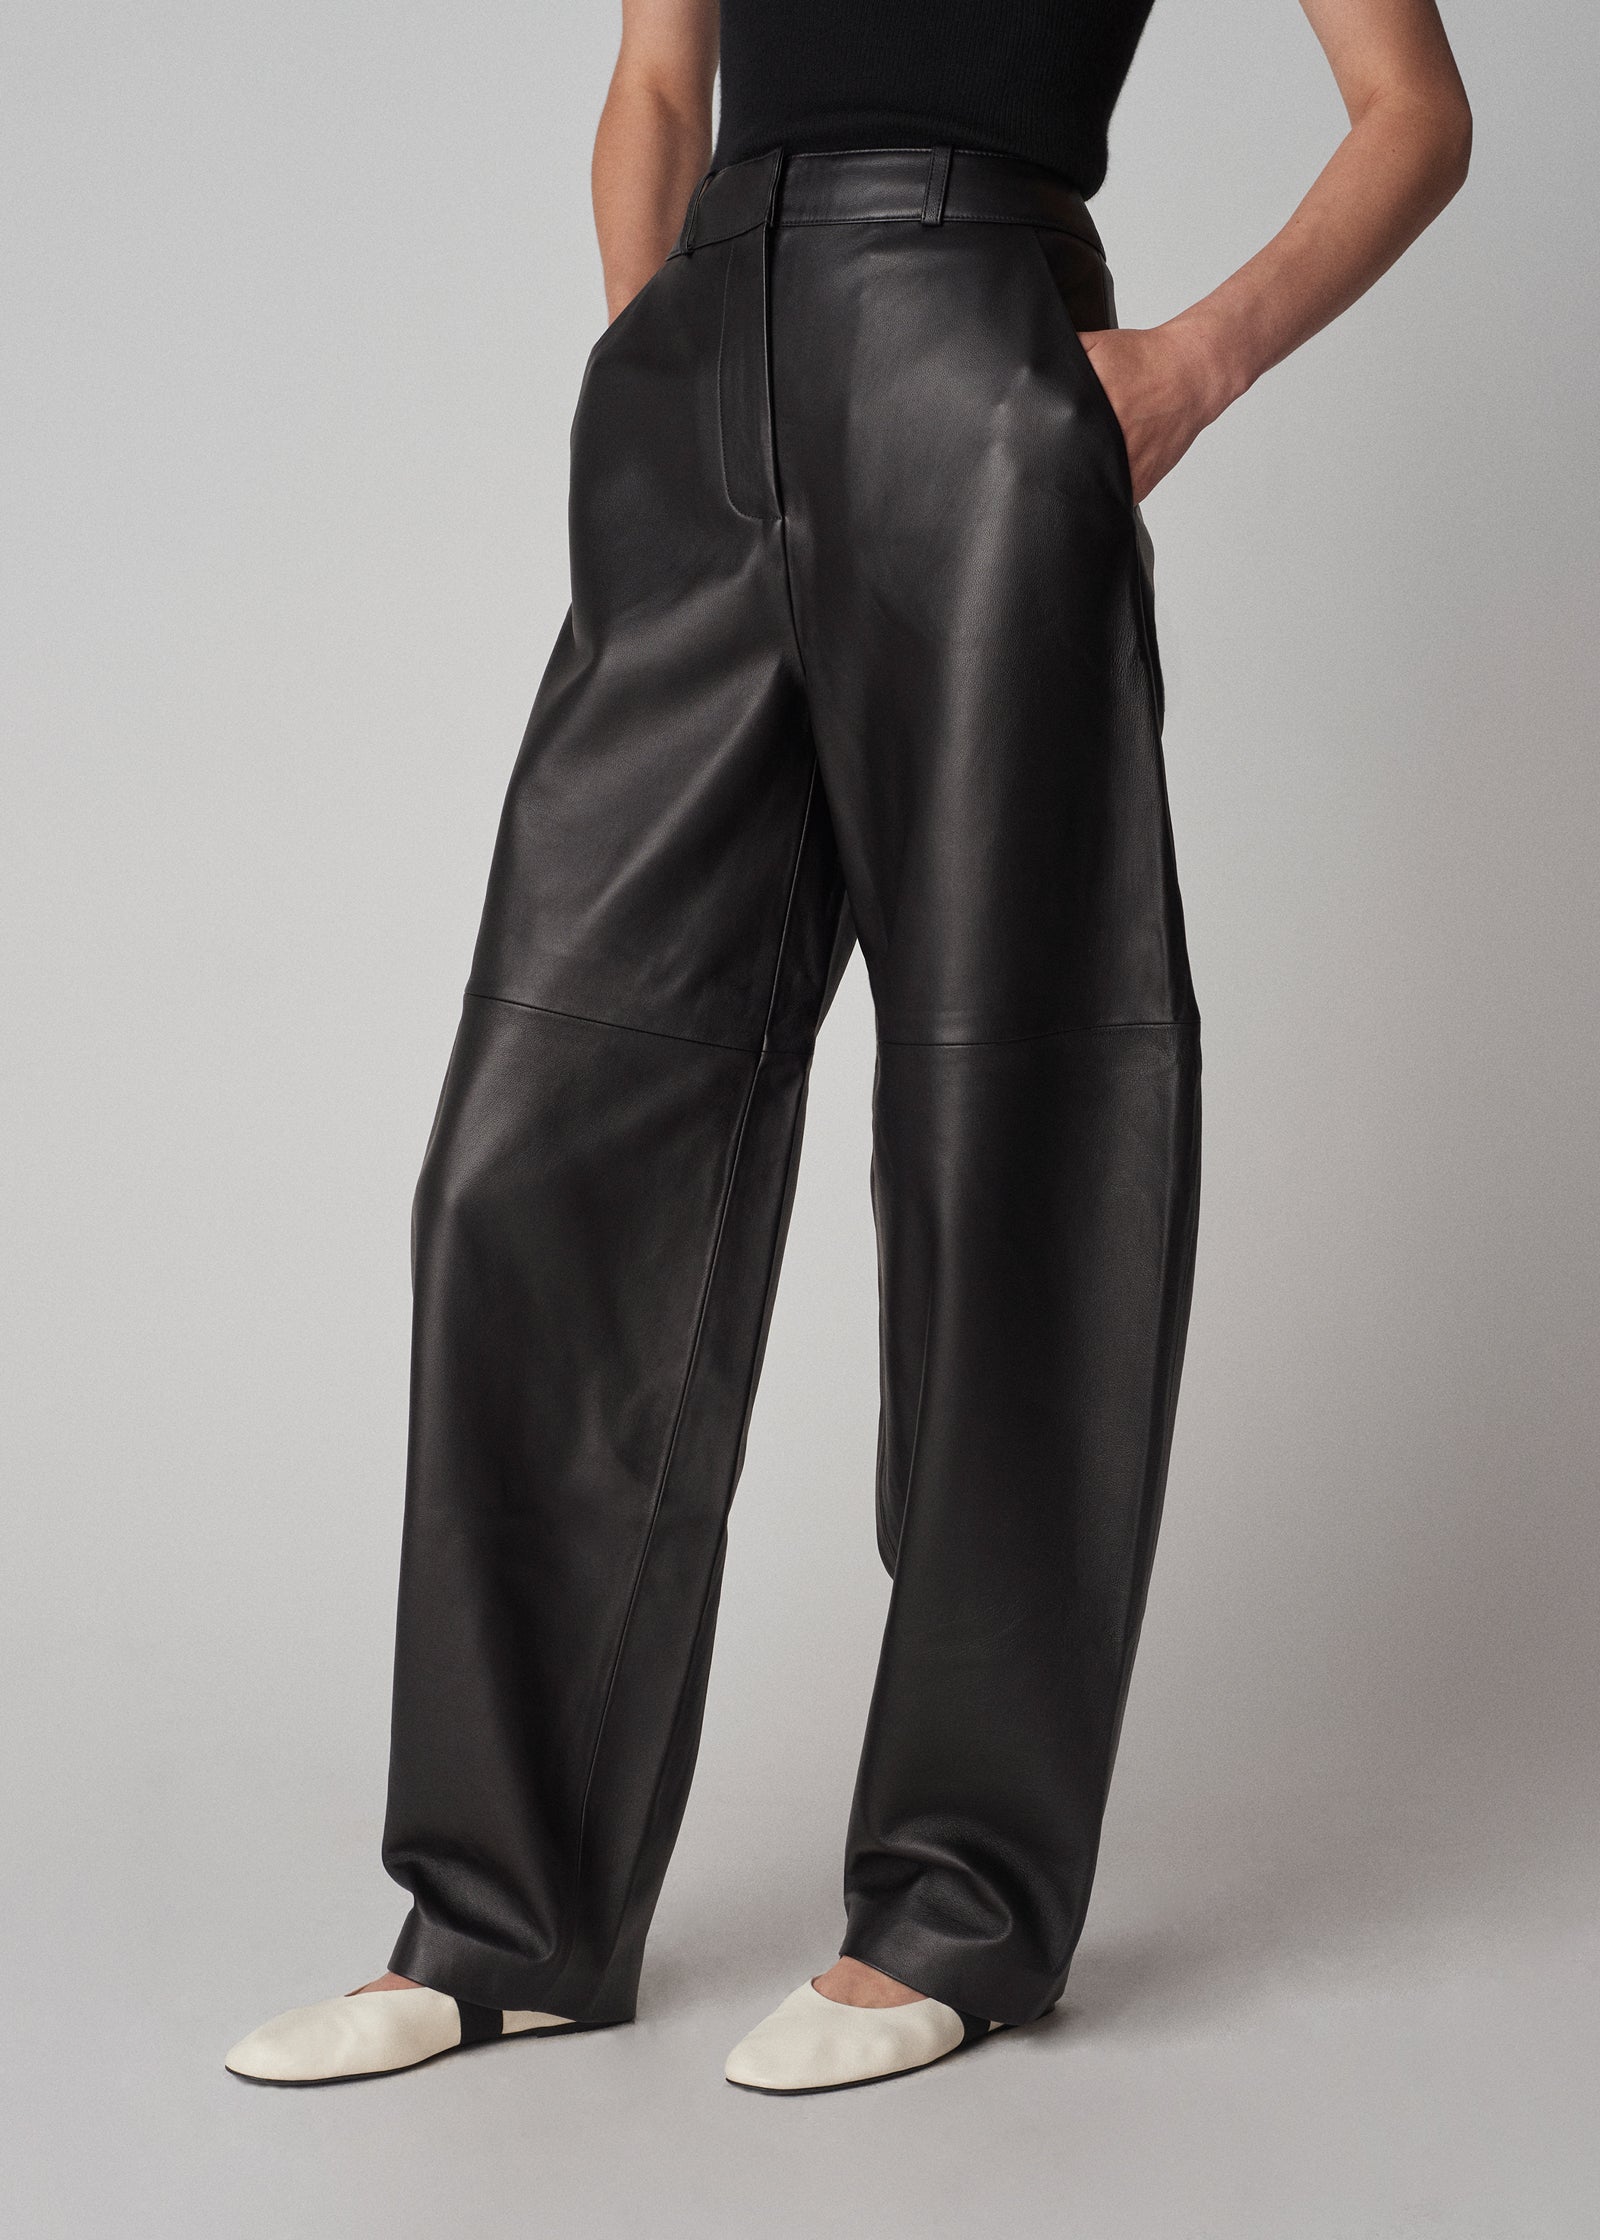 Joe Browns Rock Chick Leather Look Trousers -black | very.co.uk